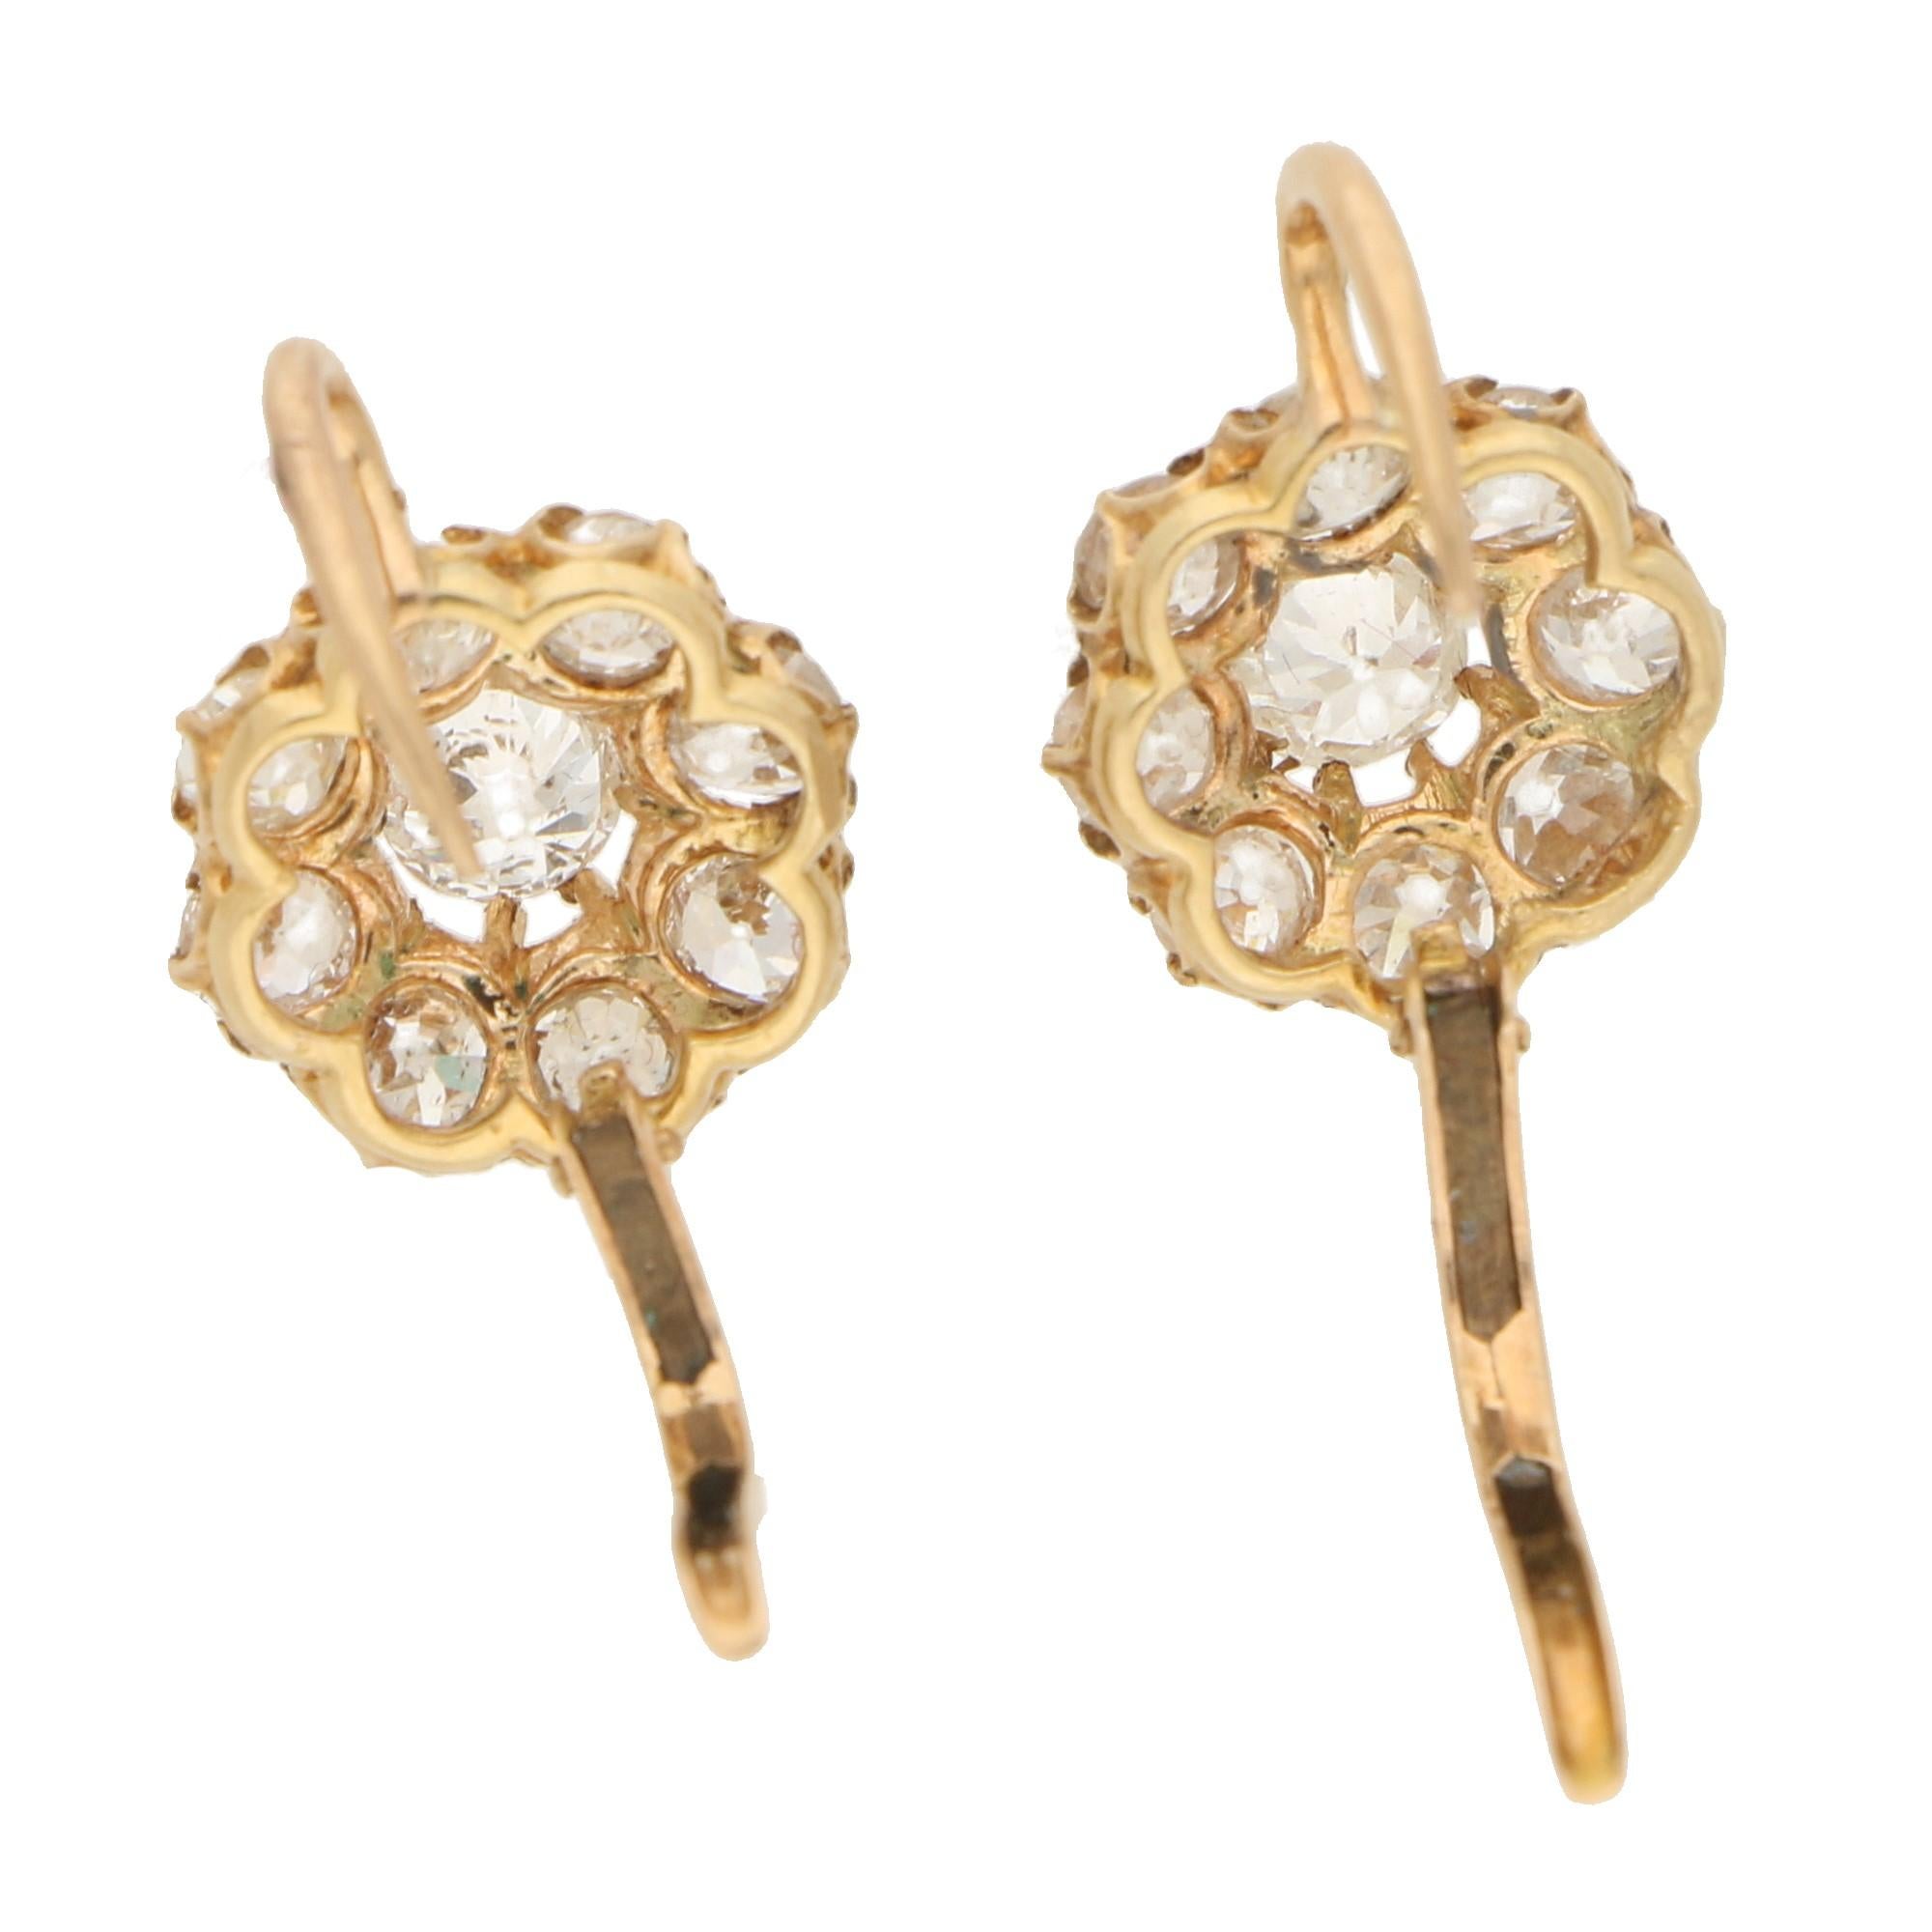 A sweet pair of Victorian diamond cluster earrings set in yellow gold. Each earring is set centrally with an old cut diamond which is clustered by a further single row of 8 eight-cut diamonds. The earrings are set on a hook with hinged back